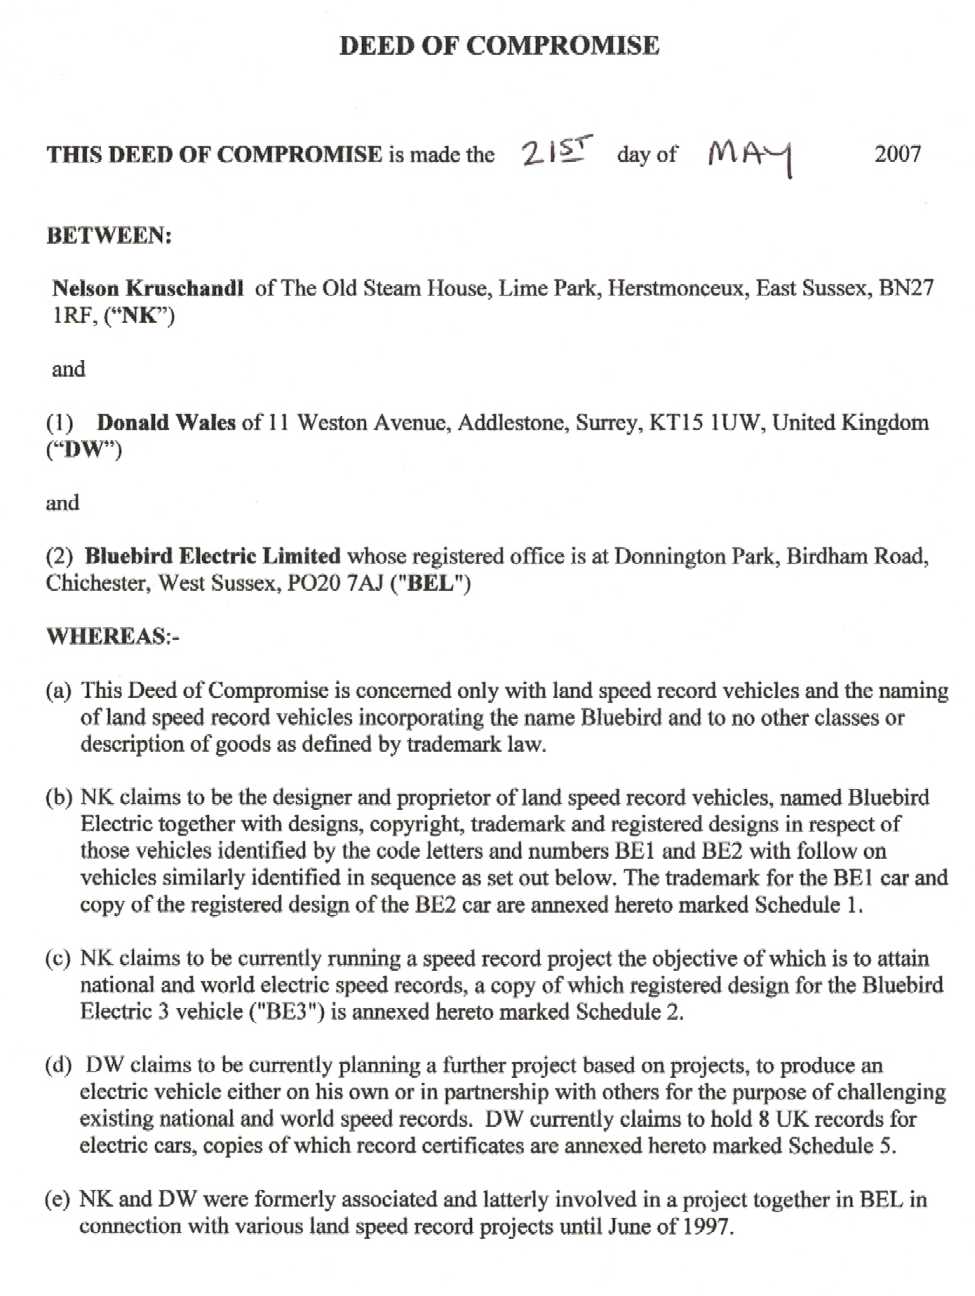 Agreement between Nelson Kruschandl and Don Wales as to use of the name Bluebird for electric vehicles